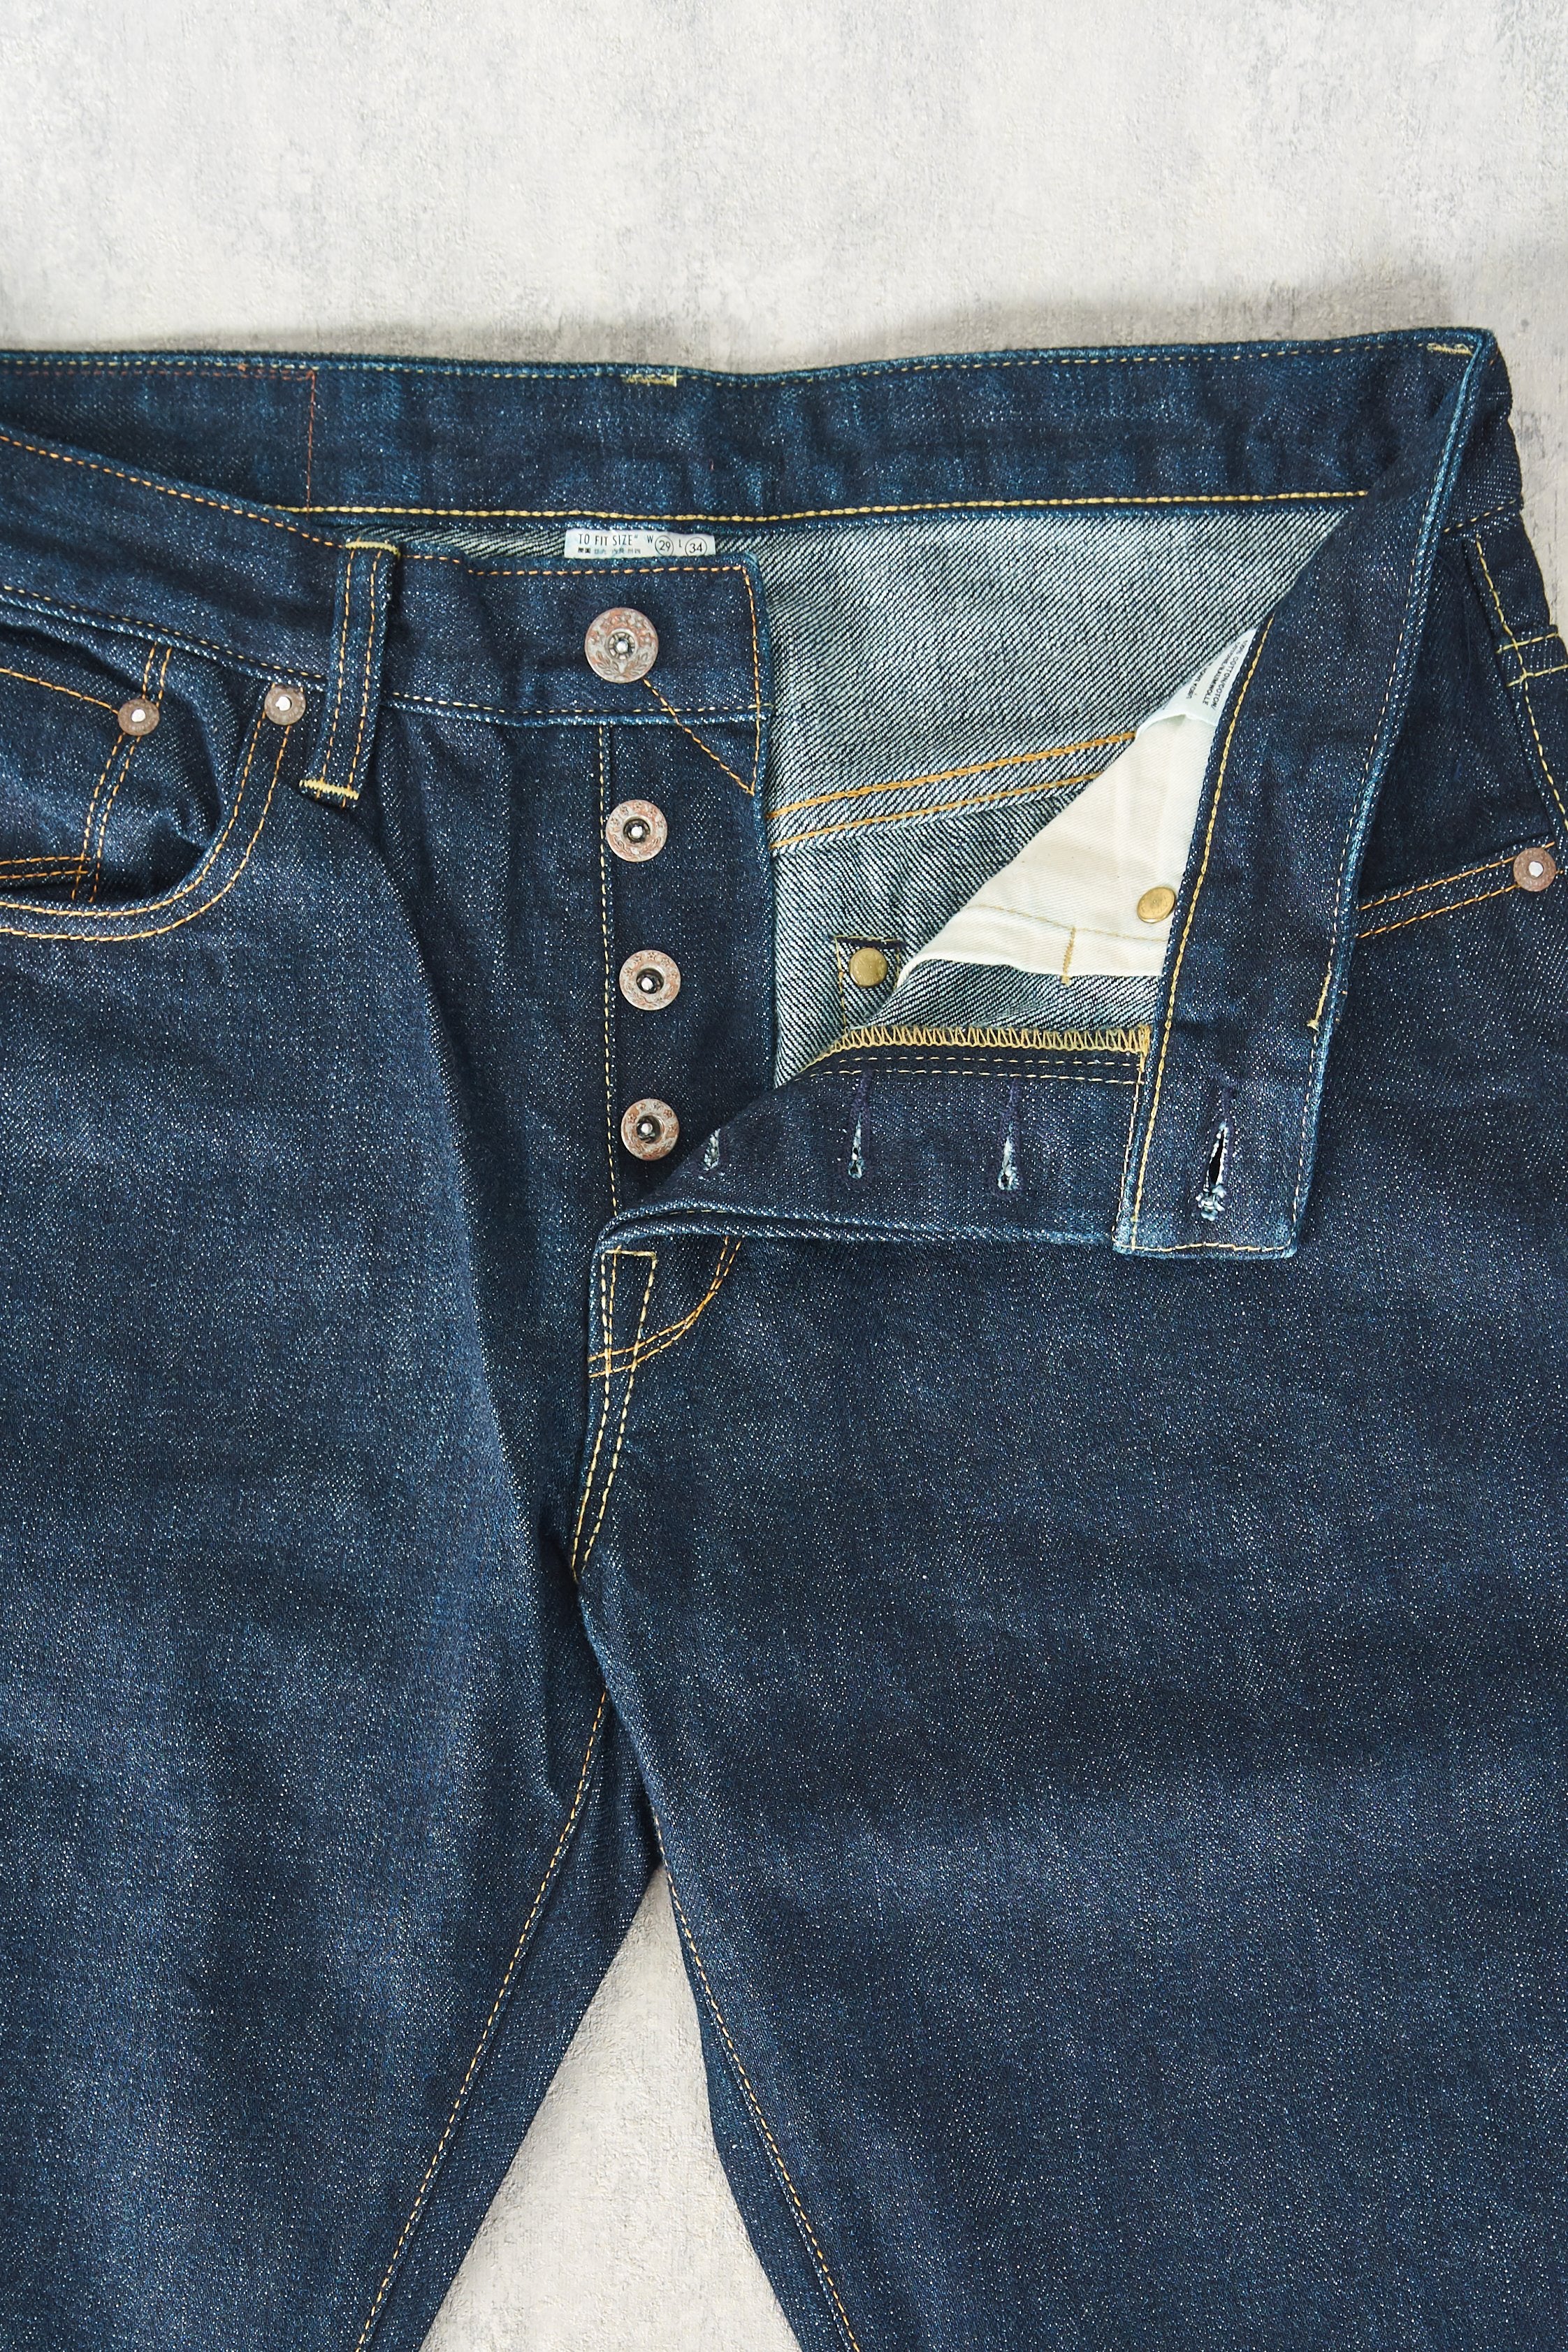 The Armoury Hidden Rivets Washed Selvage Denim Jeans